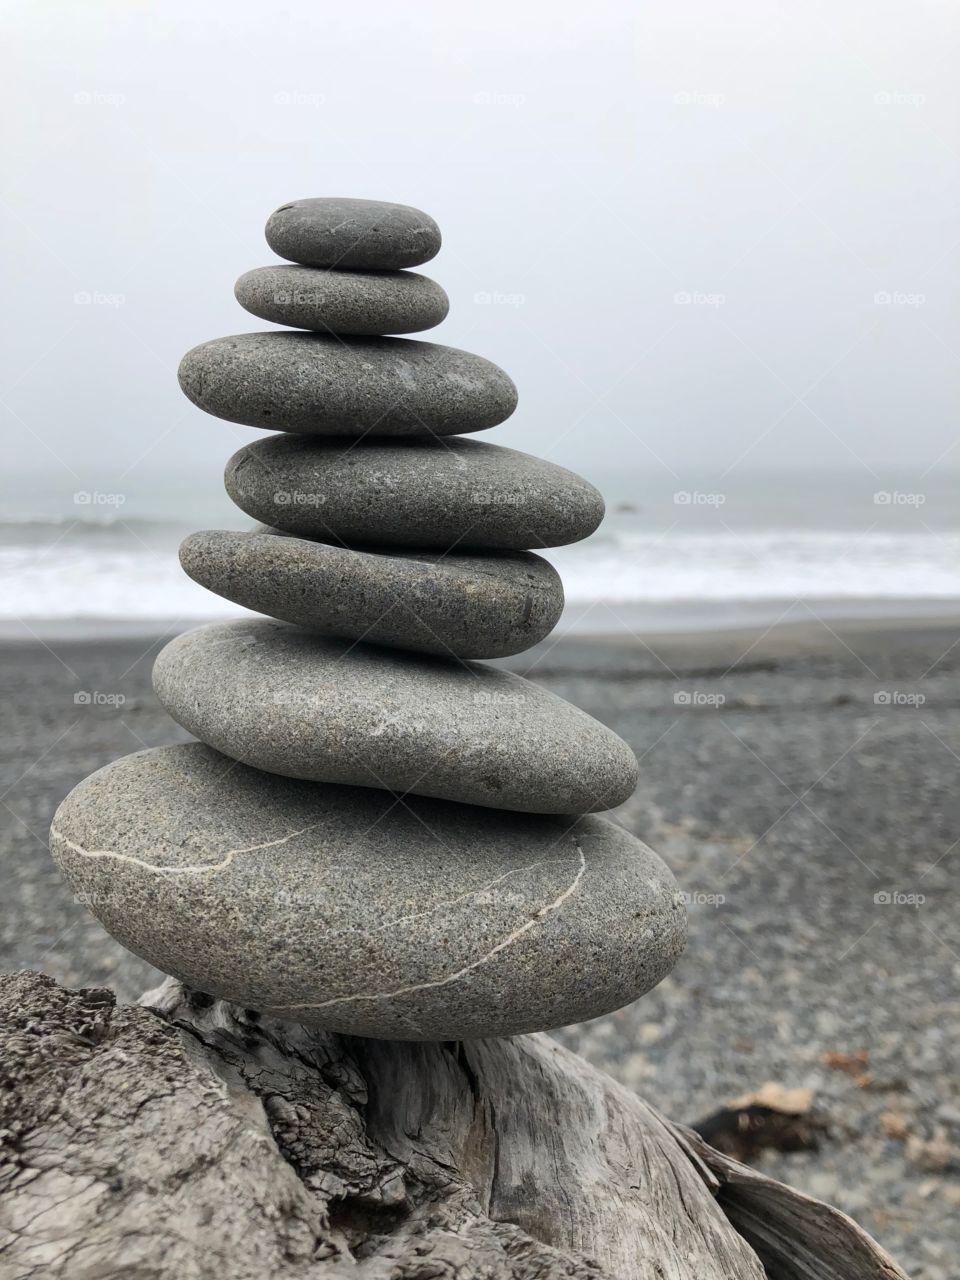 Rocks stacked on top of each other by the other man